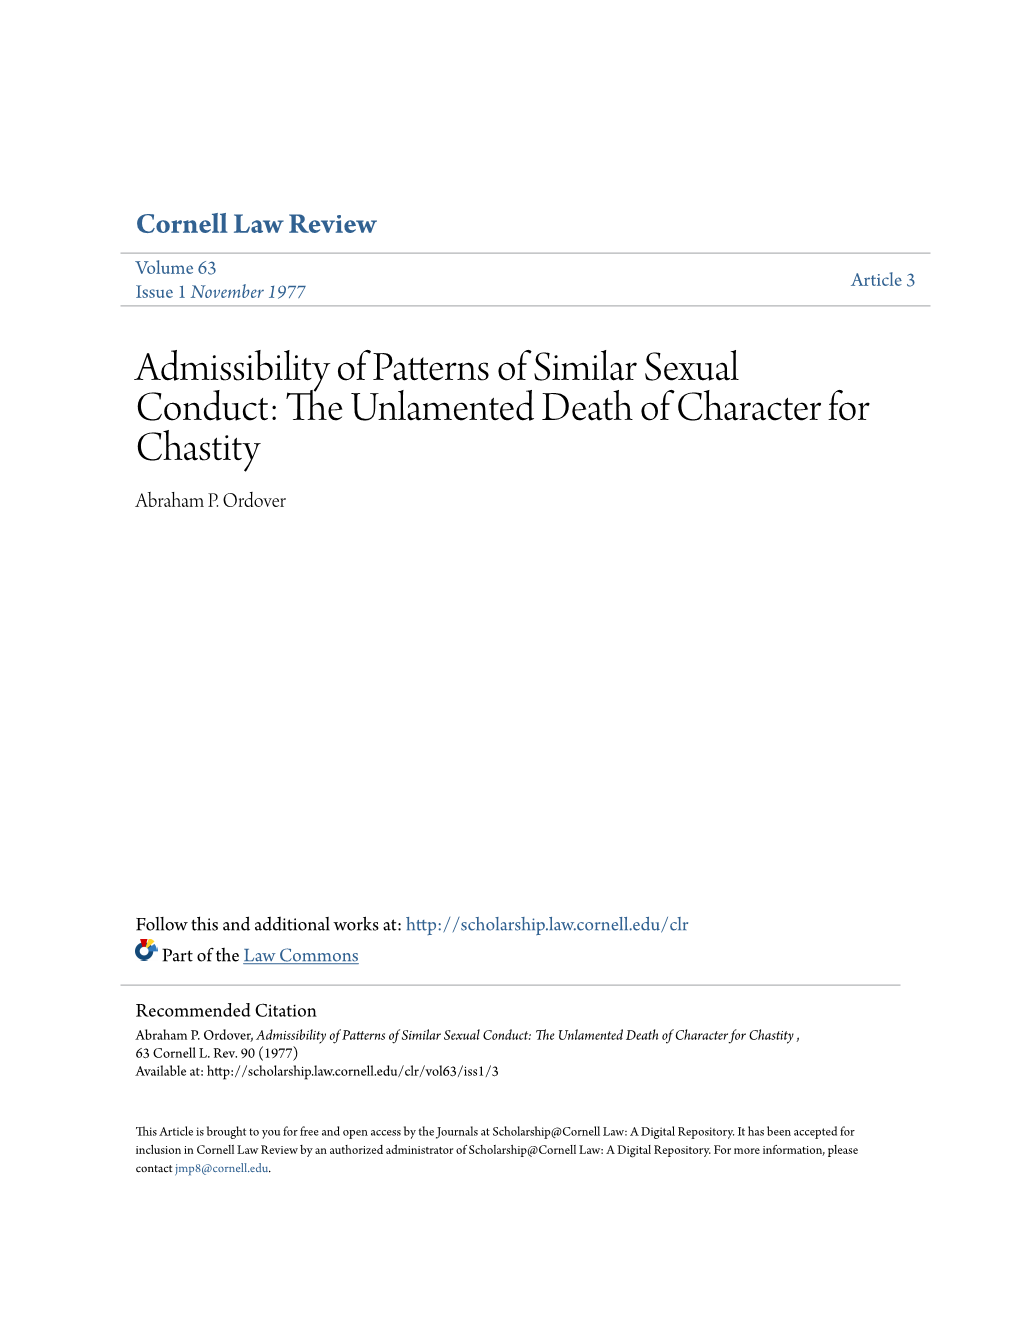 Admissibility of Patterns of Similar Sexual Conduct: the Nlu Amented Death of Character for Chastity Abraham P